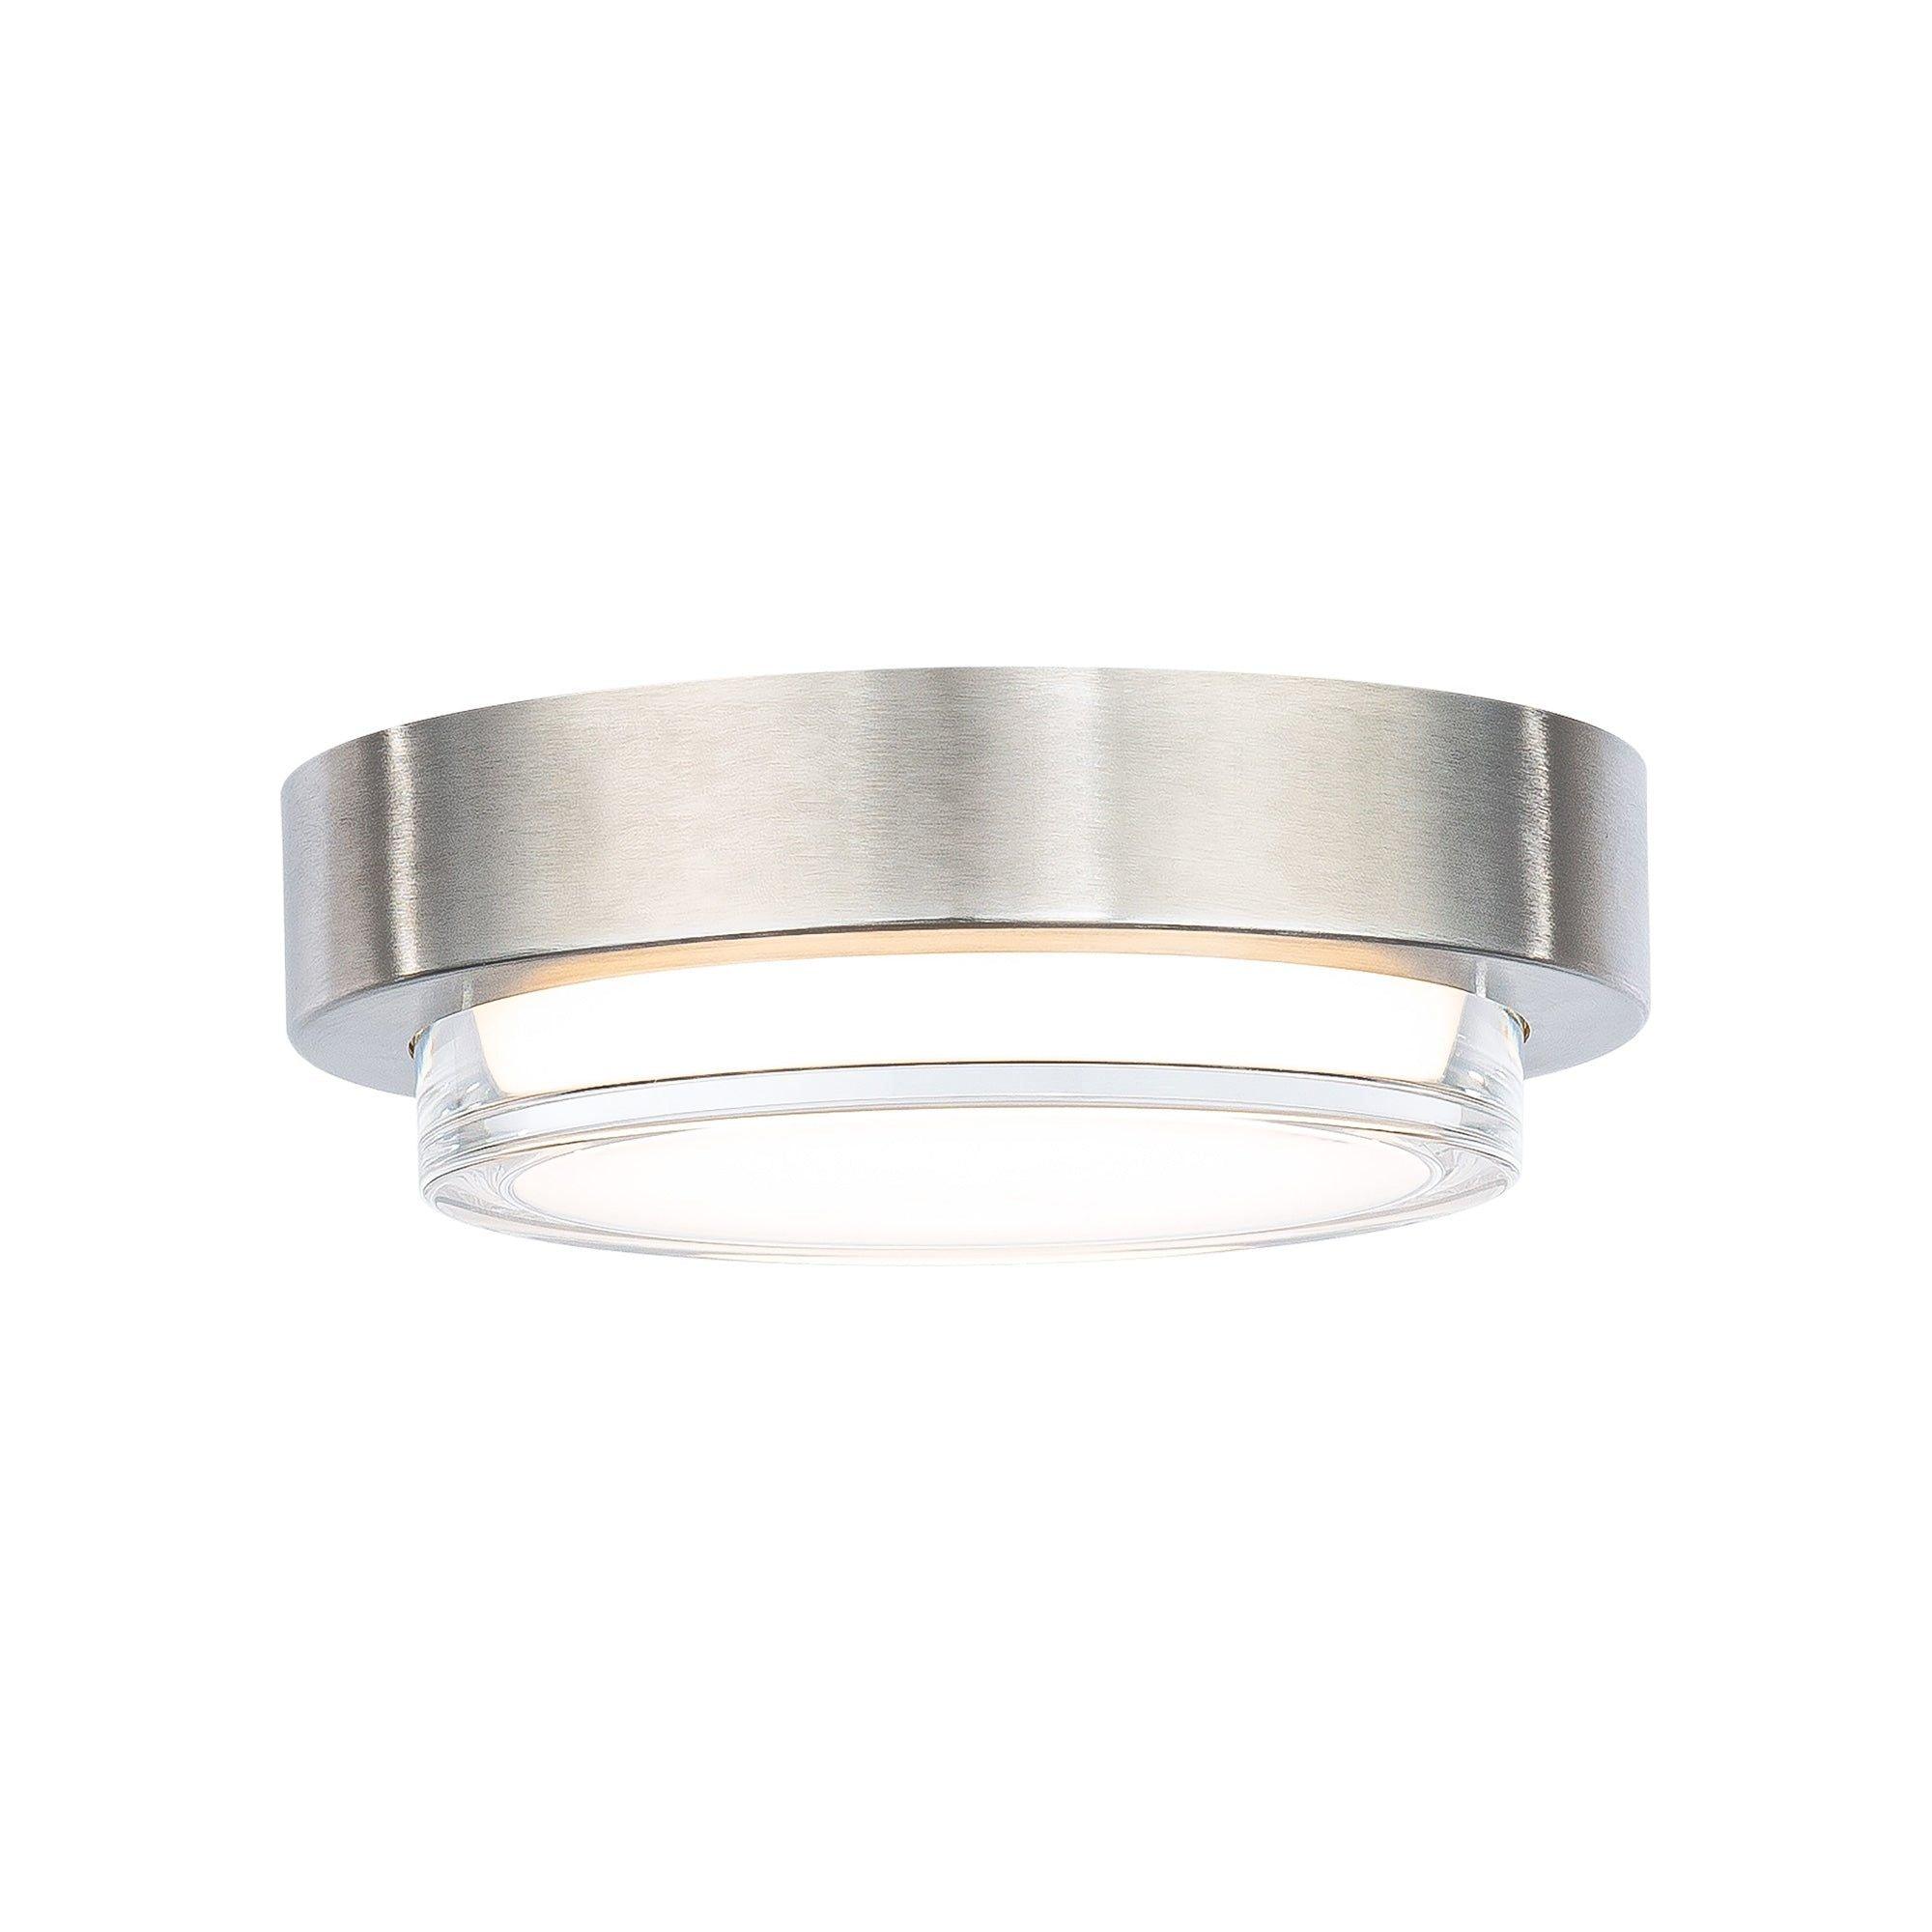 Modern Forms - Kind 8" LED Round - Lights Canada